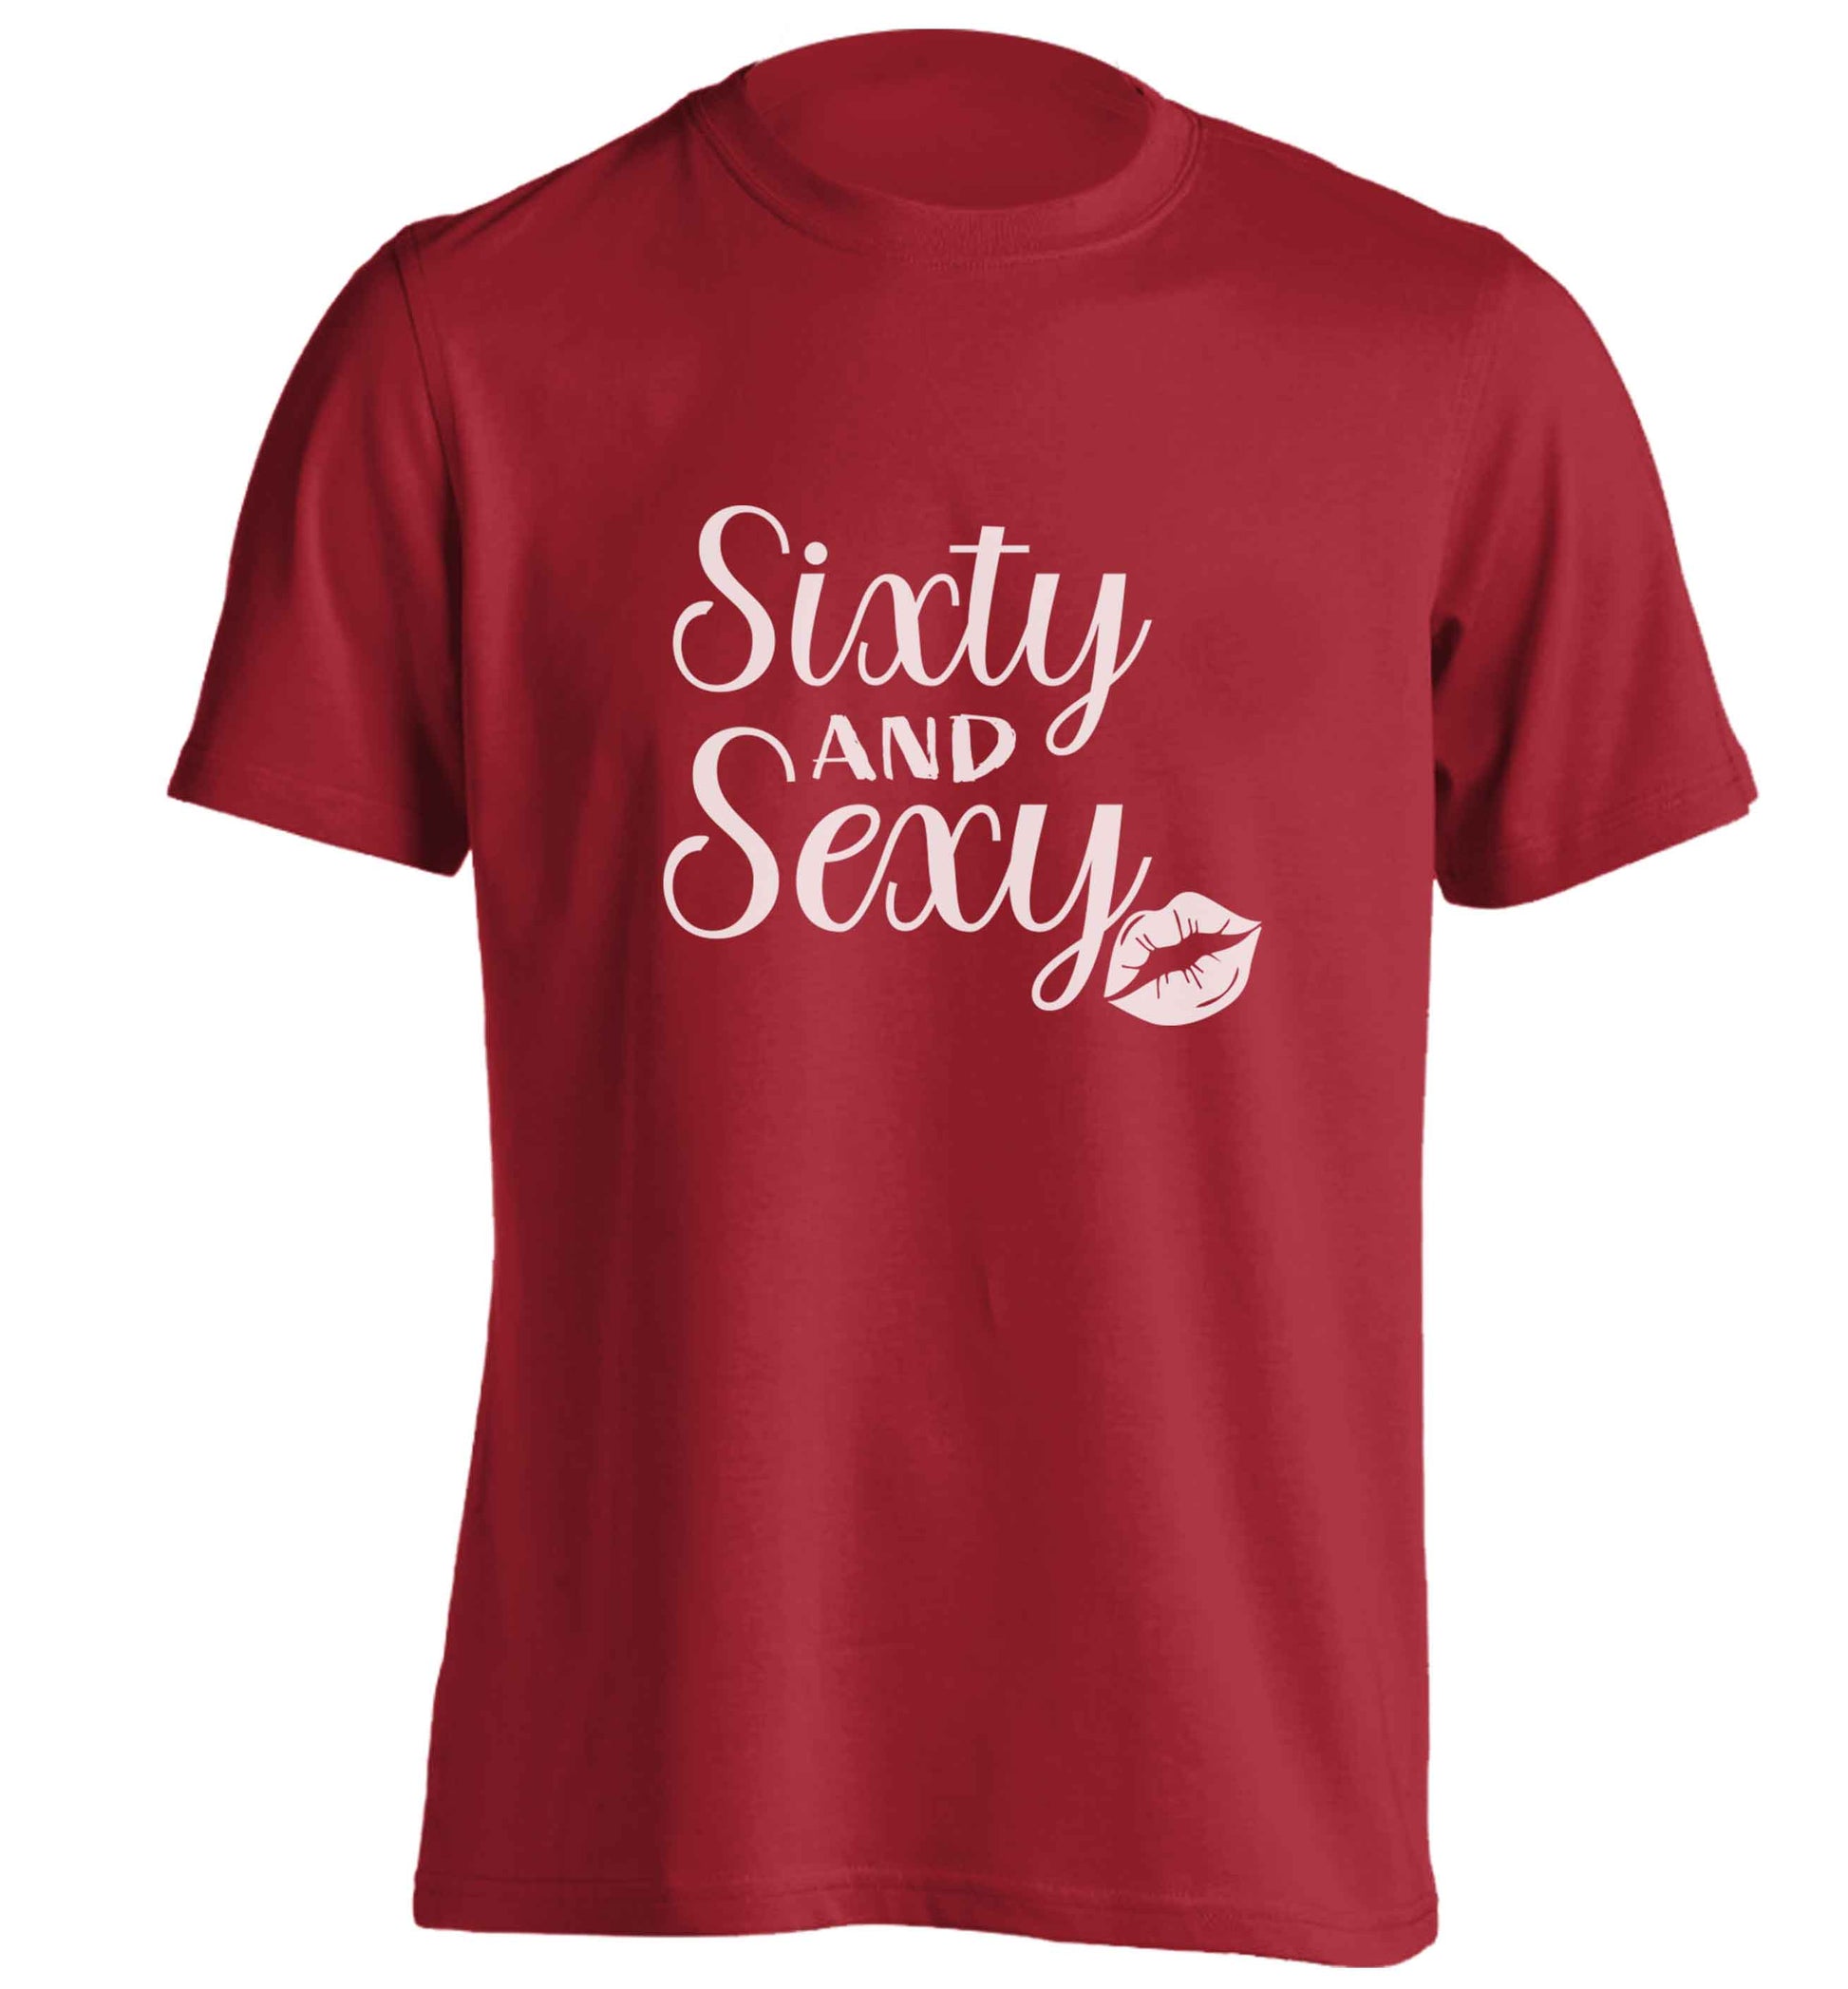 Sixty and sexy adults unisex red Tshirt 2XL